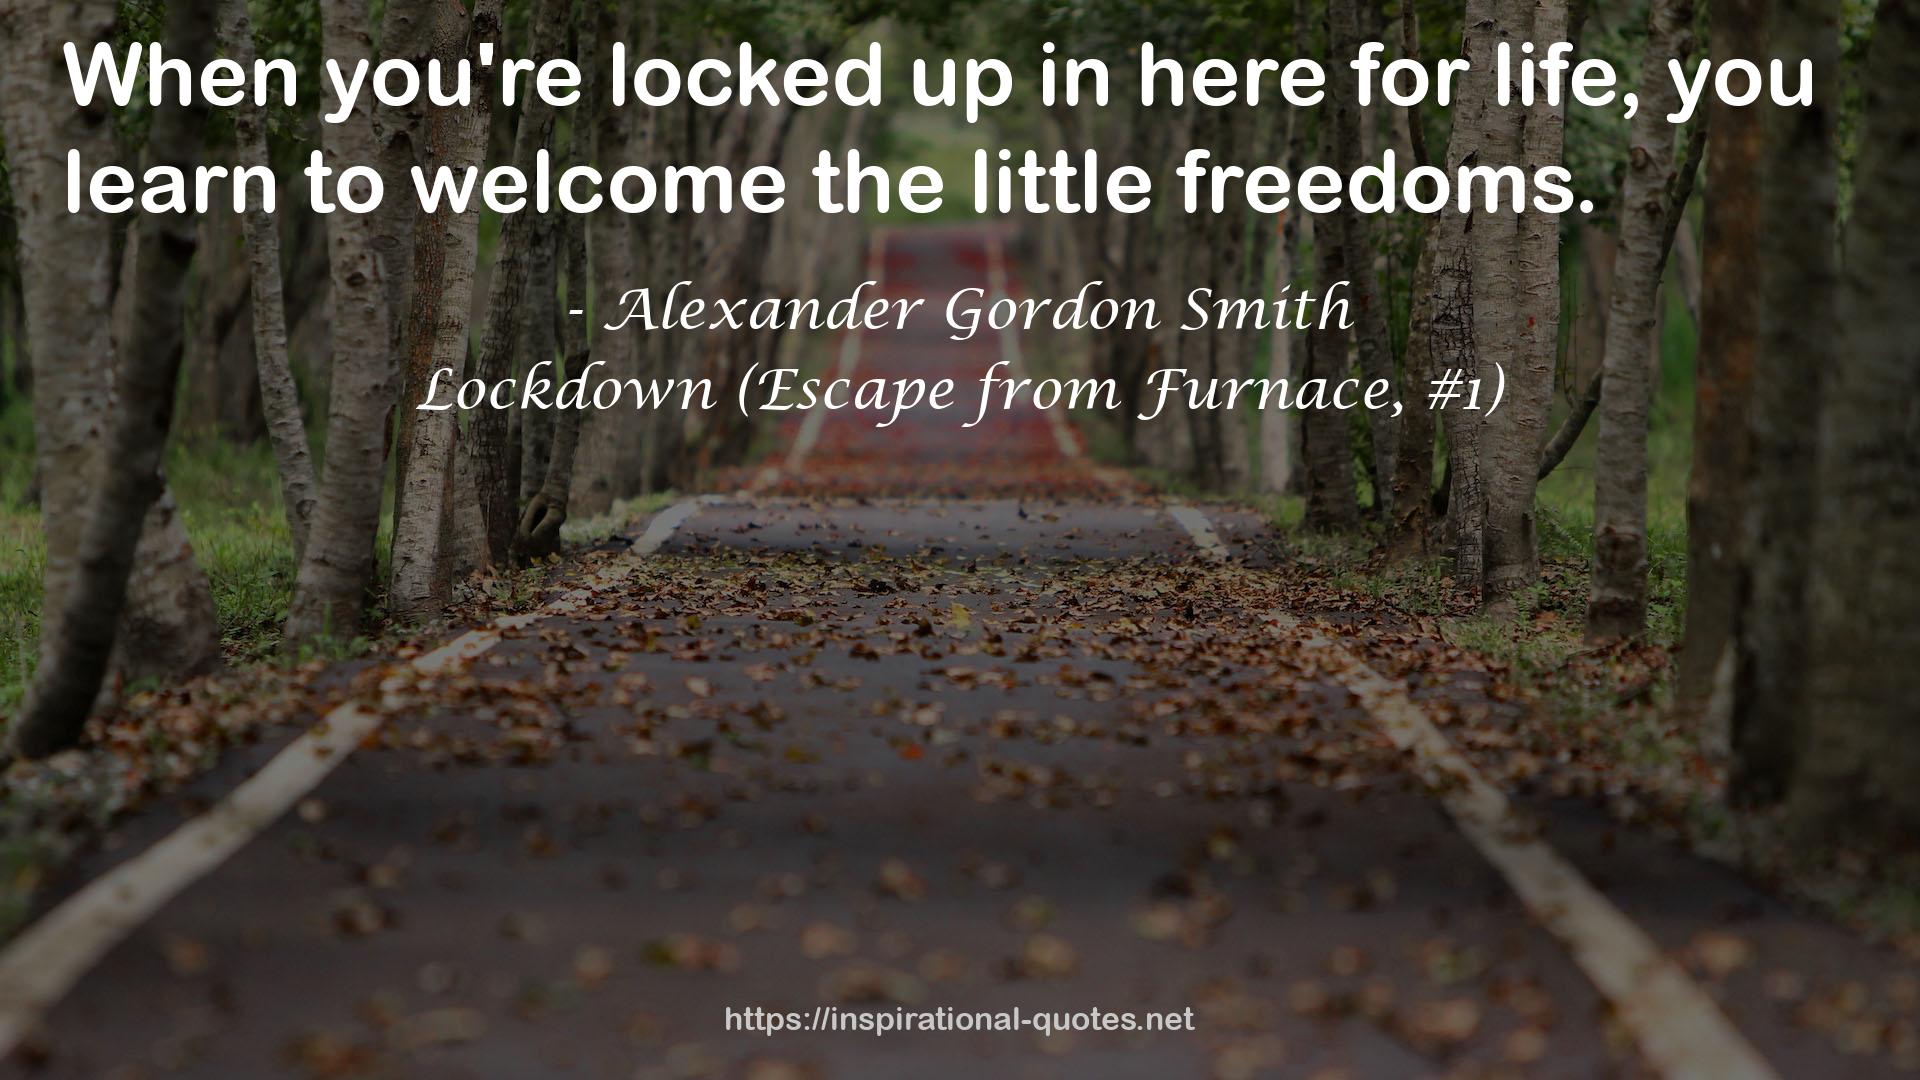 Lockdown (Escape from Furnace, #1) QUOTES